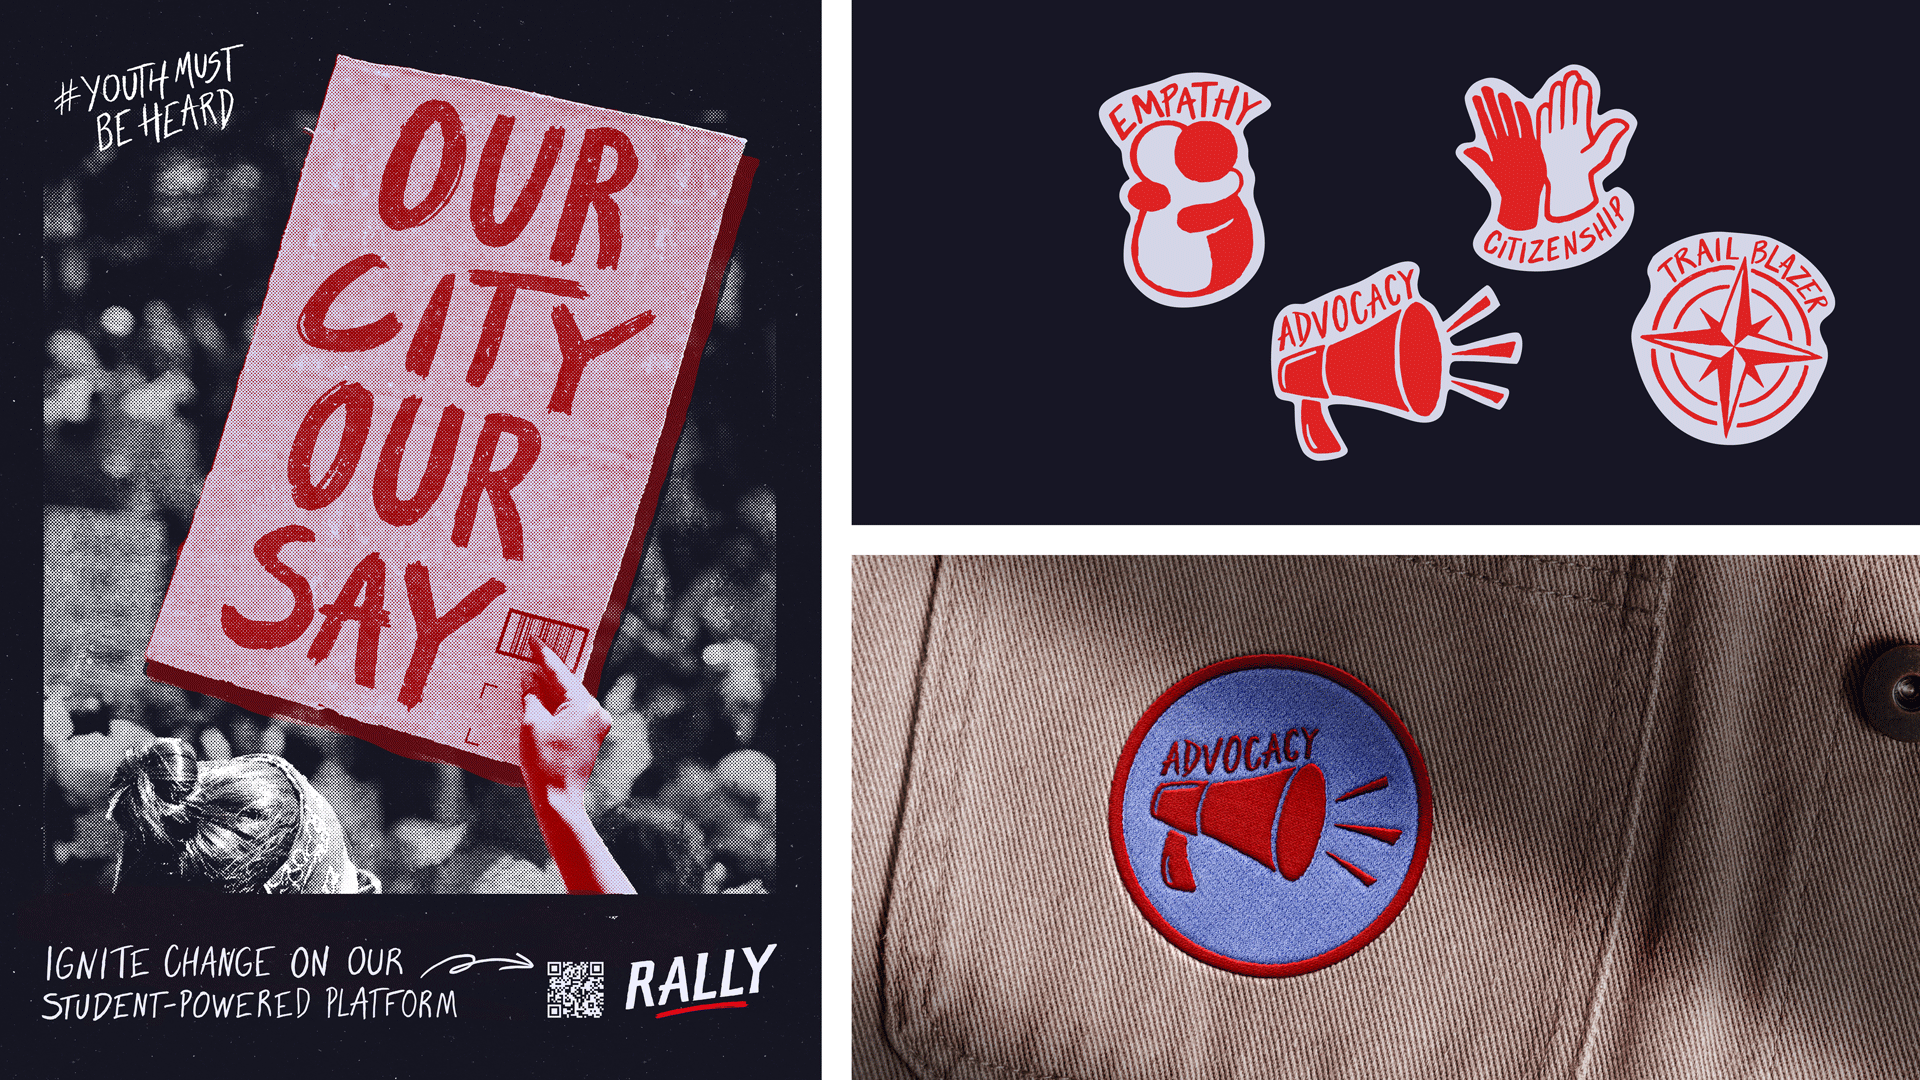 3 separate images including a typographic poster depicting a duo-toned sign that reads OUR CITY OUR SAY, five red stickers, and a patch design on a corduroy shirt.